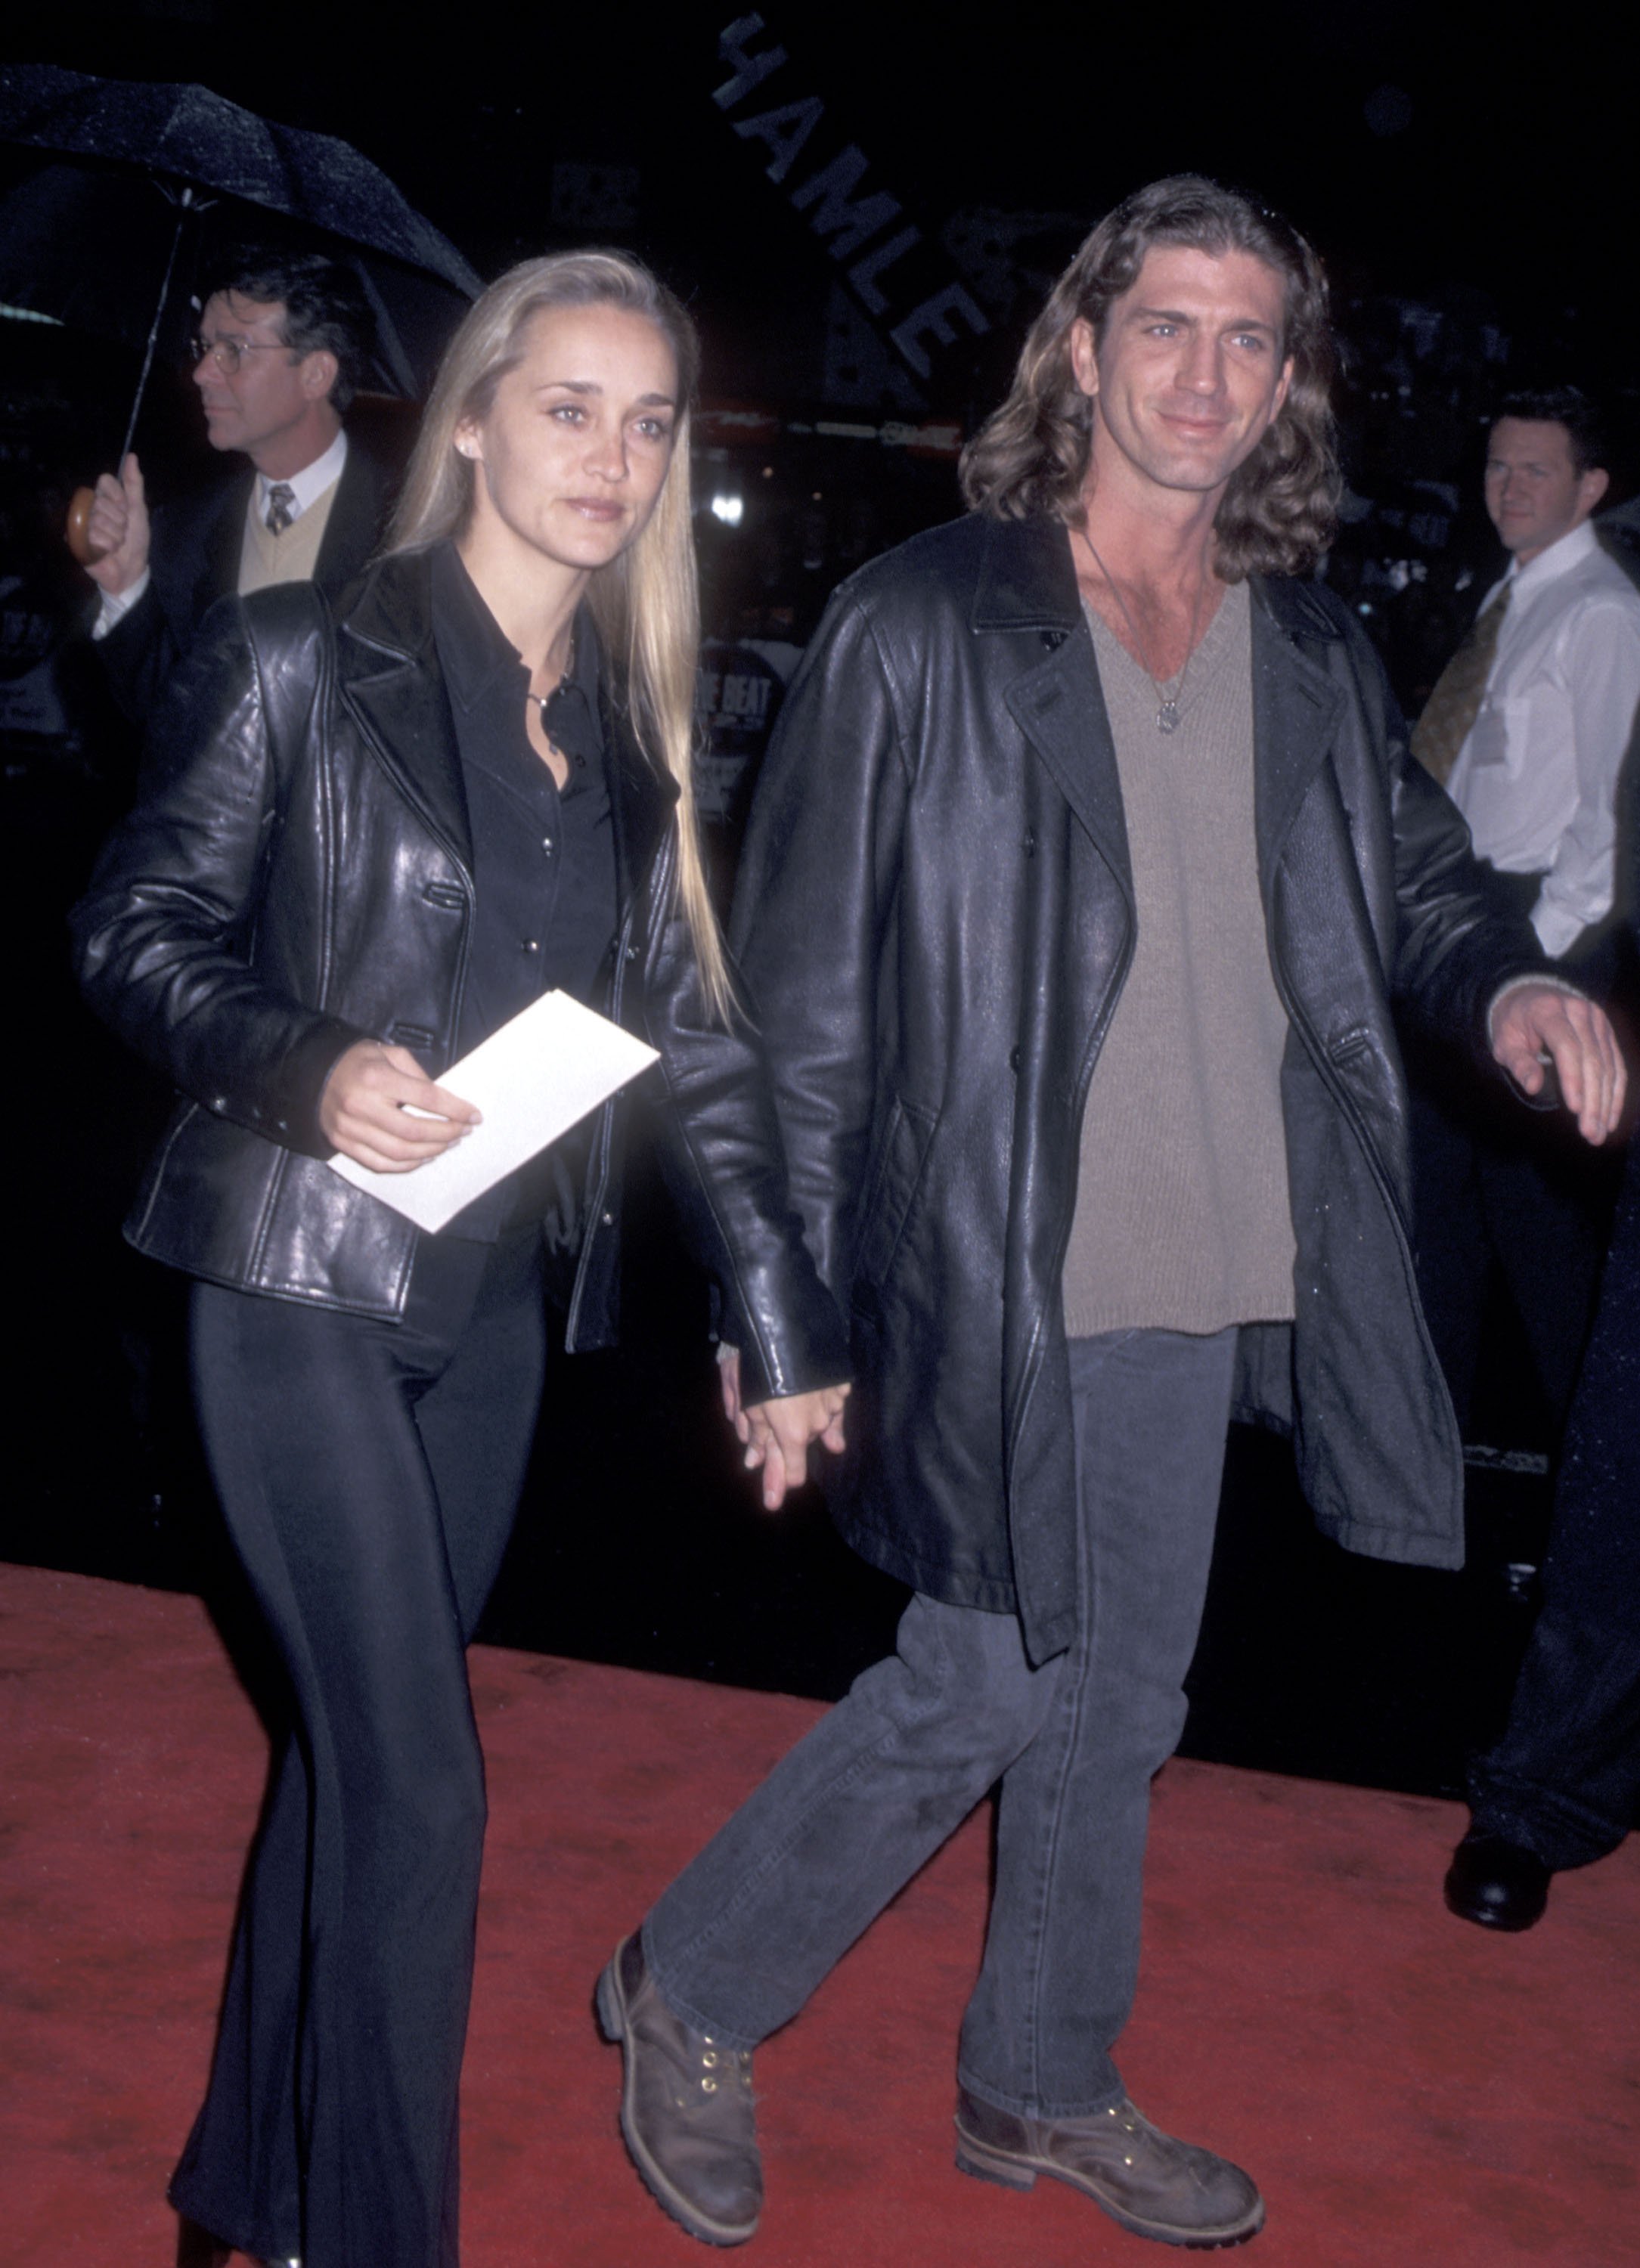 Kirsten Barlow and Joe Lando at the premiere of "Daylight" on December 5, 1996, in Hollywood | Source: Getty Images